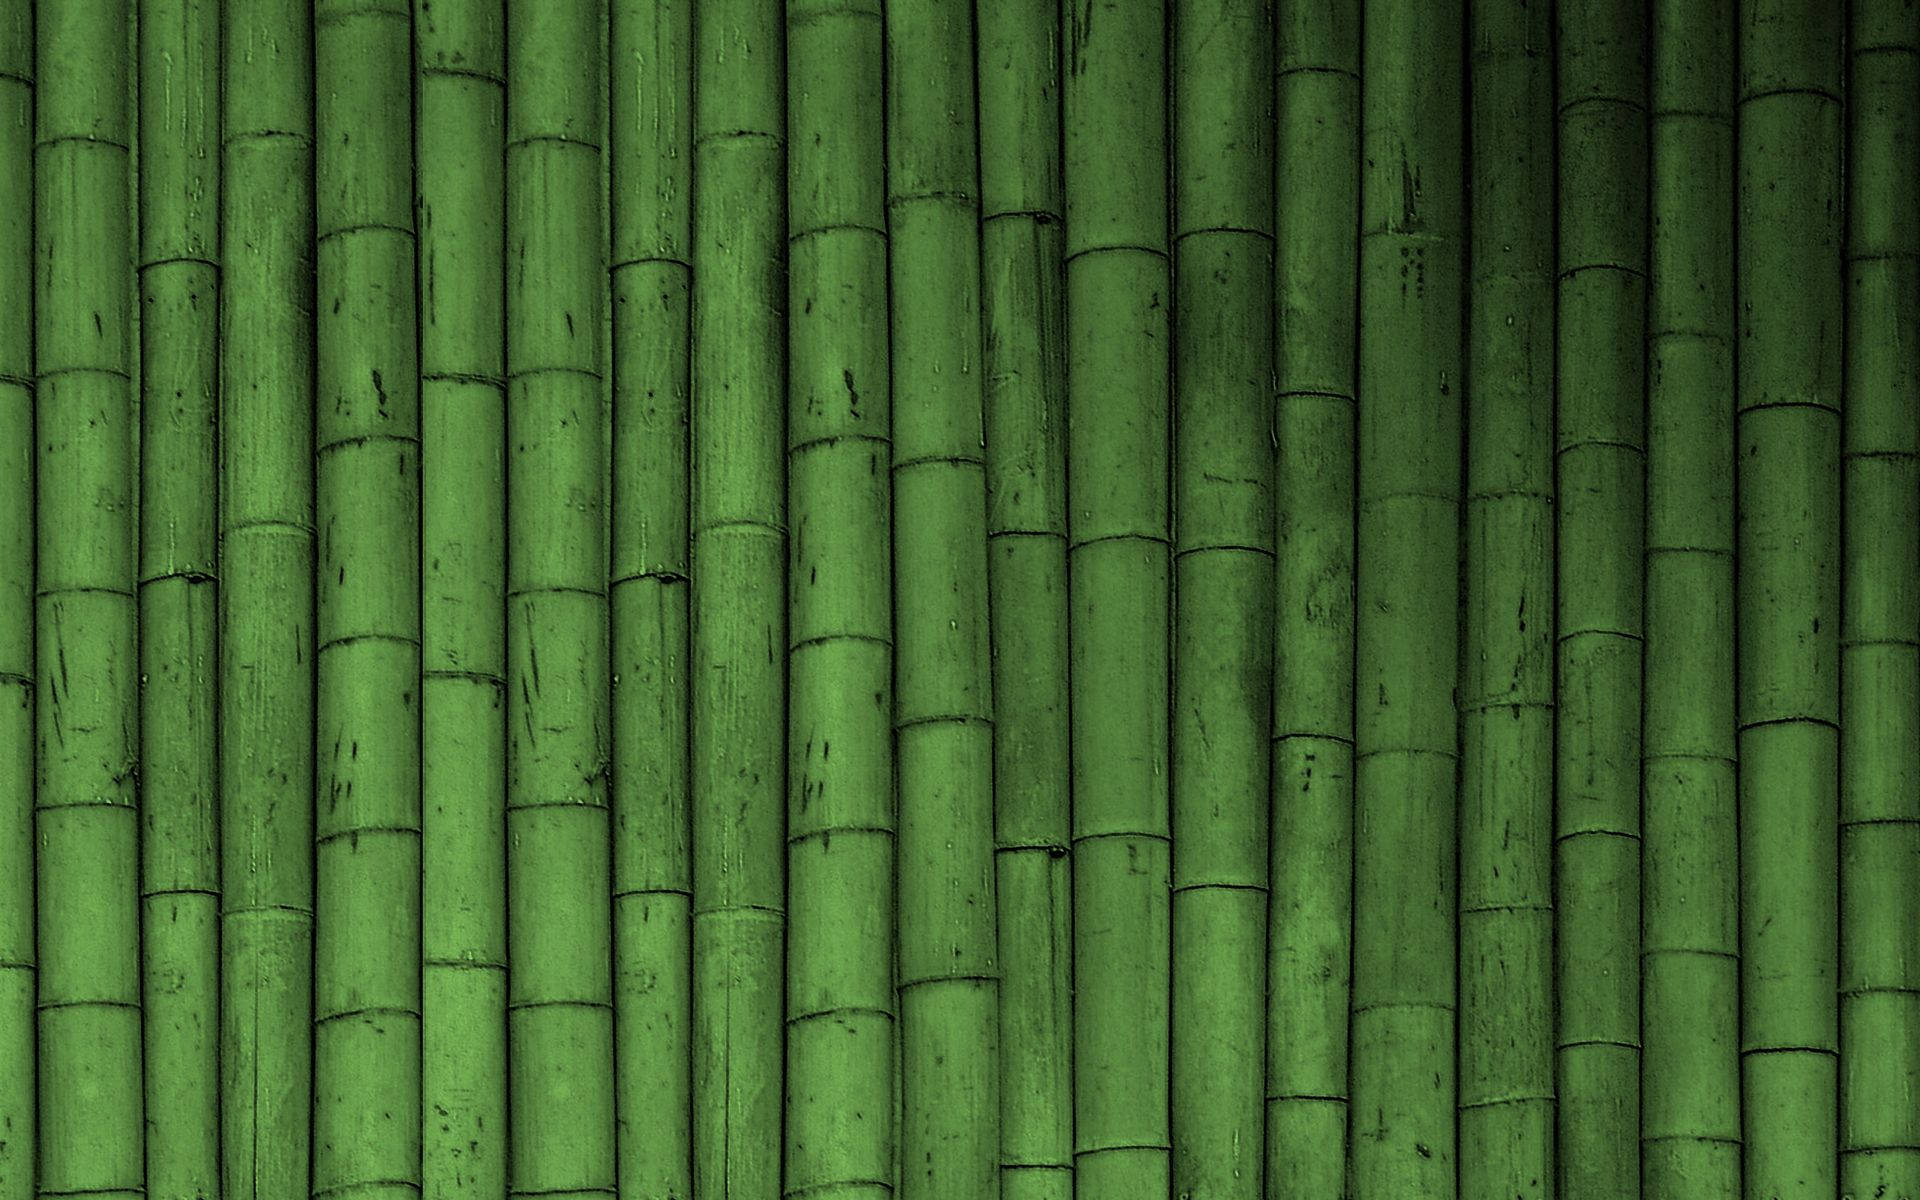 Green Bamboo Fence Background